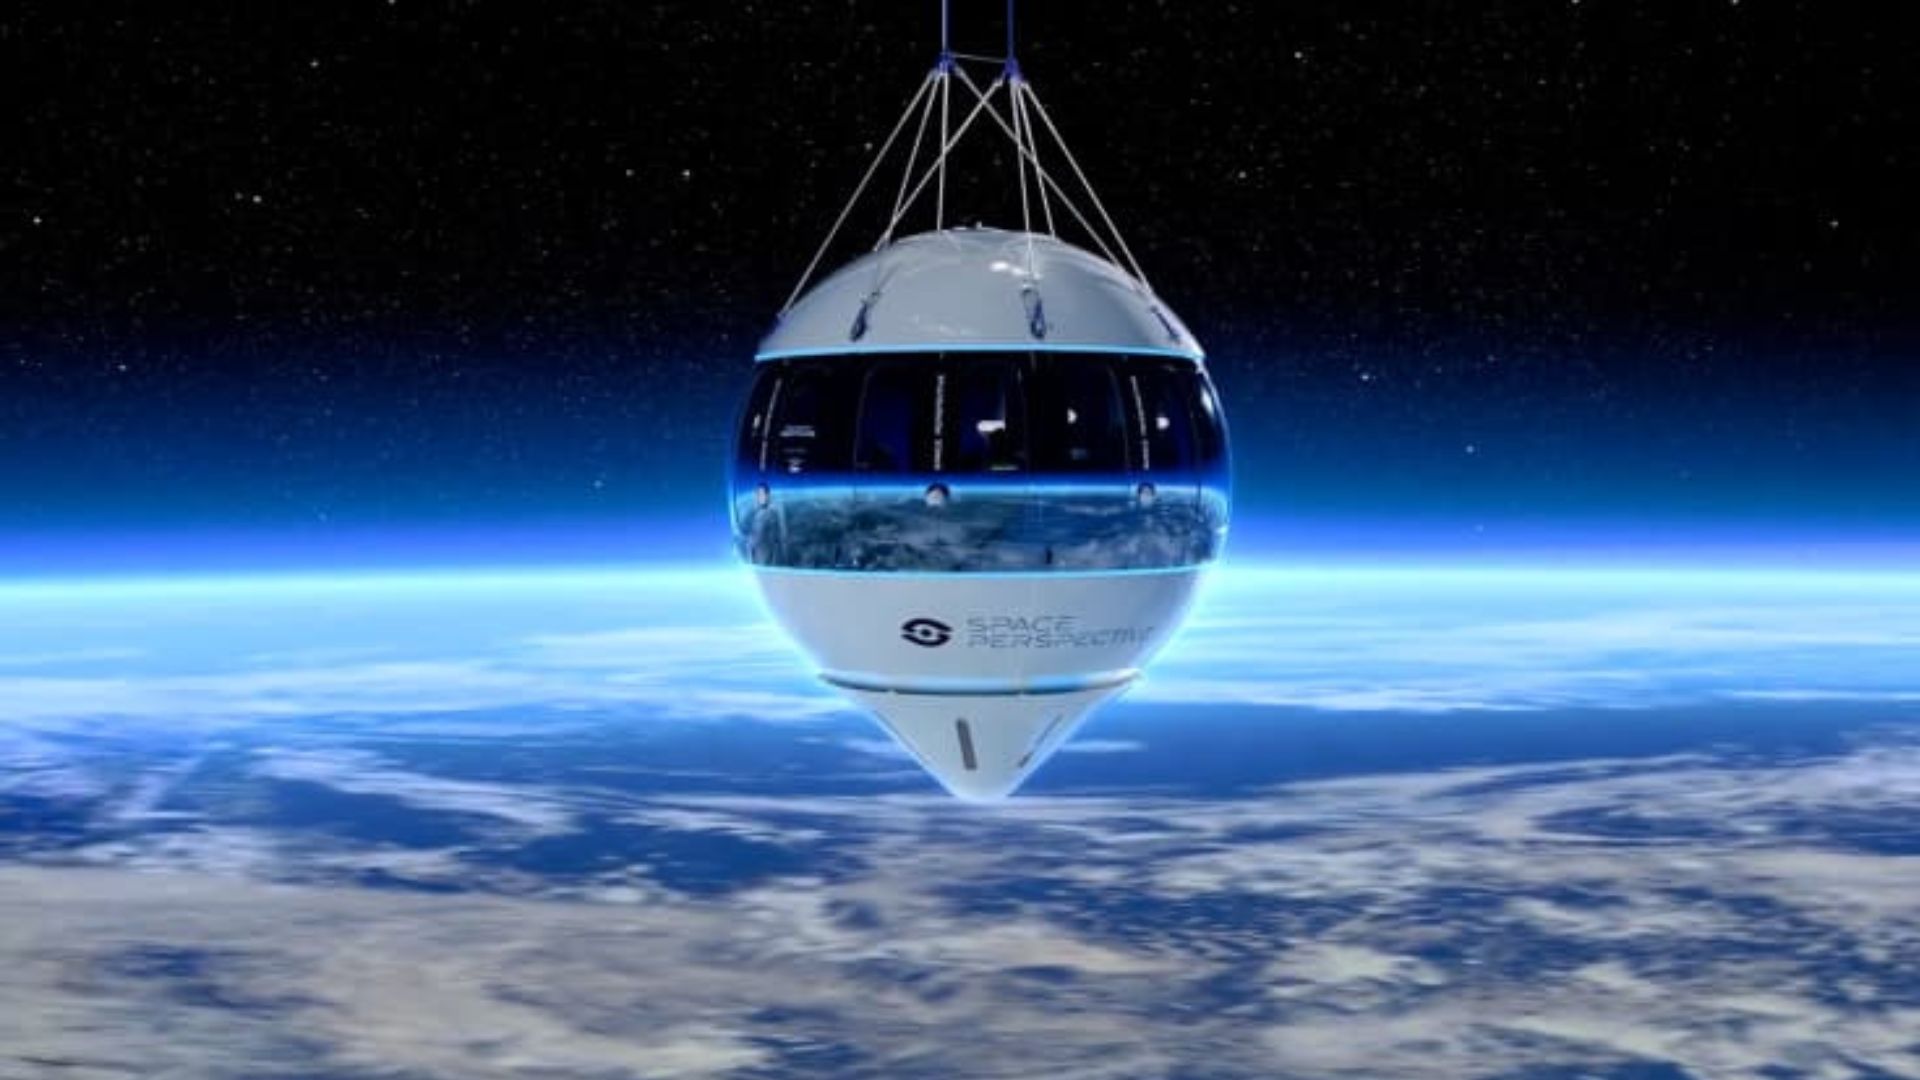 Startups are building balloons to hoist tourists 100,000 feet into the stratosphere